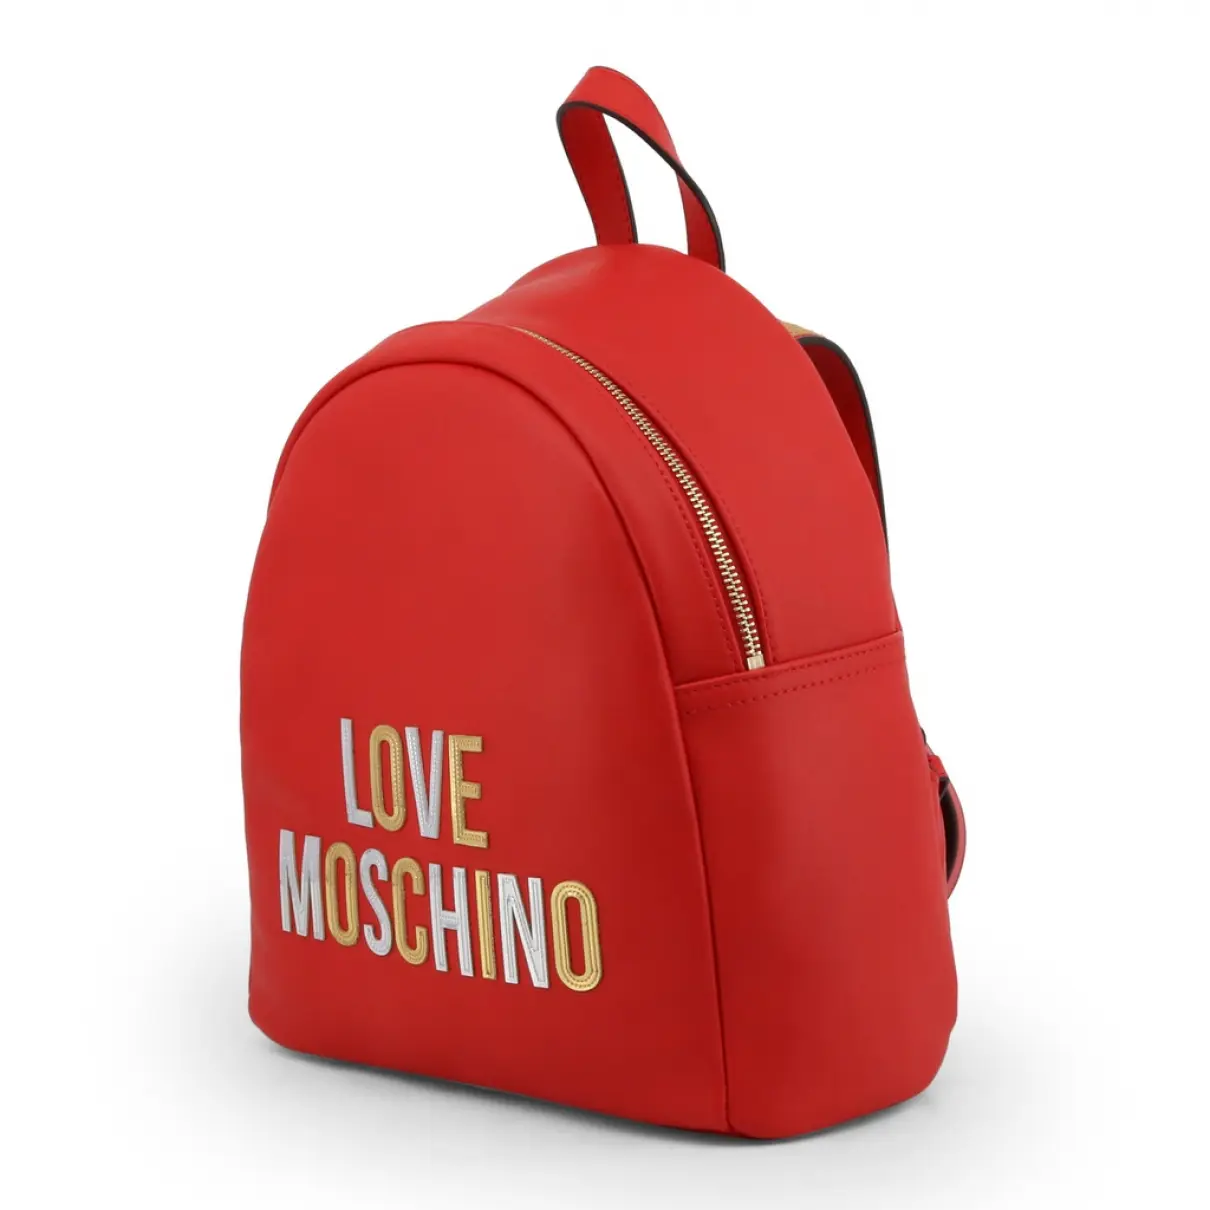 Moschino Love Backpack for sale